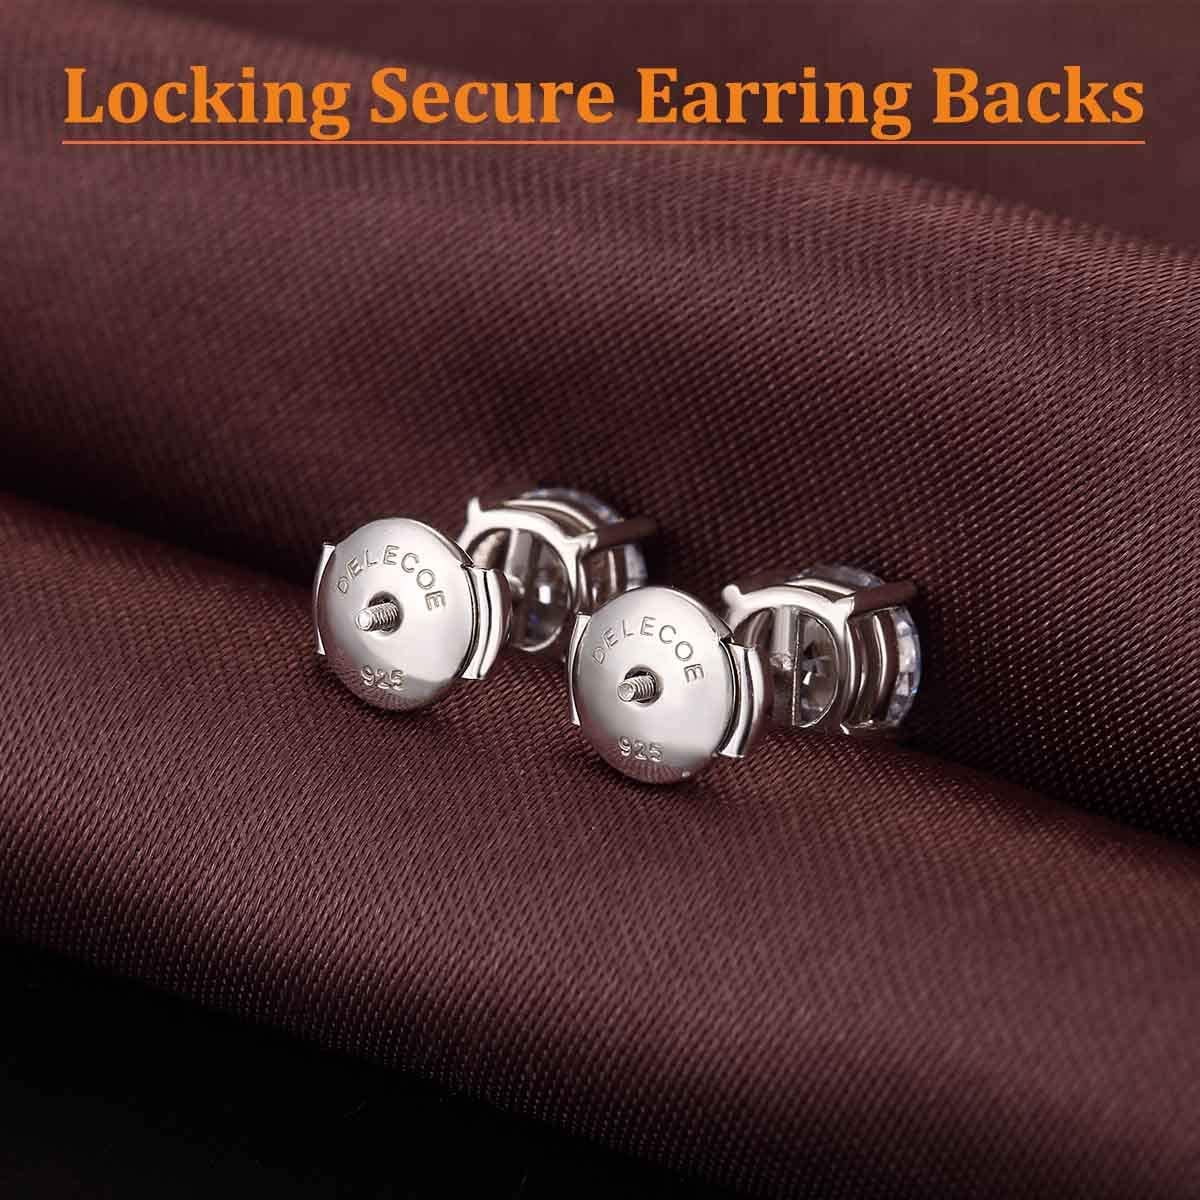 2 Paris Sterling Silver Locking Earring Backs Replacements for Diamond  Studs, 18K White Gold Plated Screw Earring Backs, Secure Hypoallergenic  Secure Earring Backs, No Fading Comfort Earring Backs 